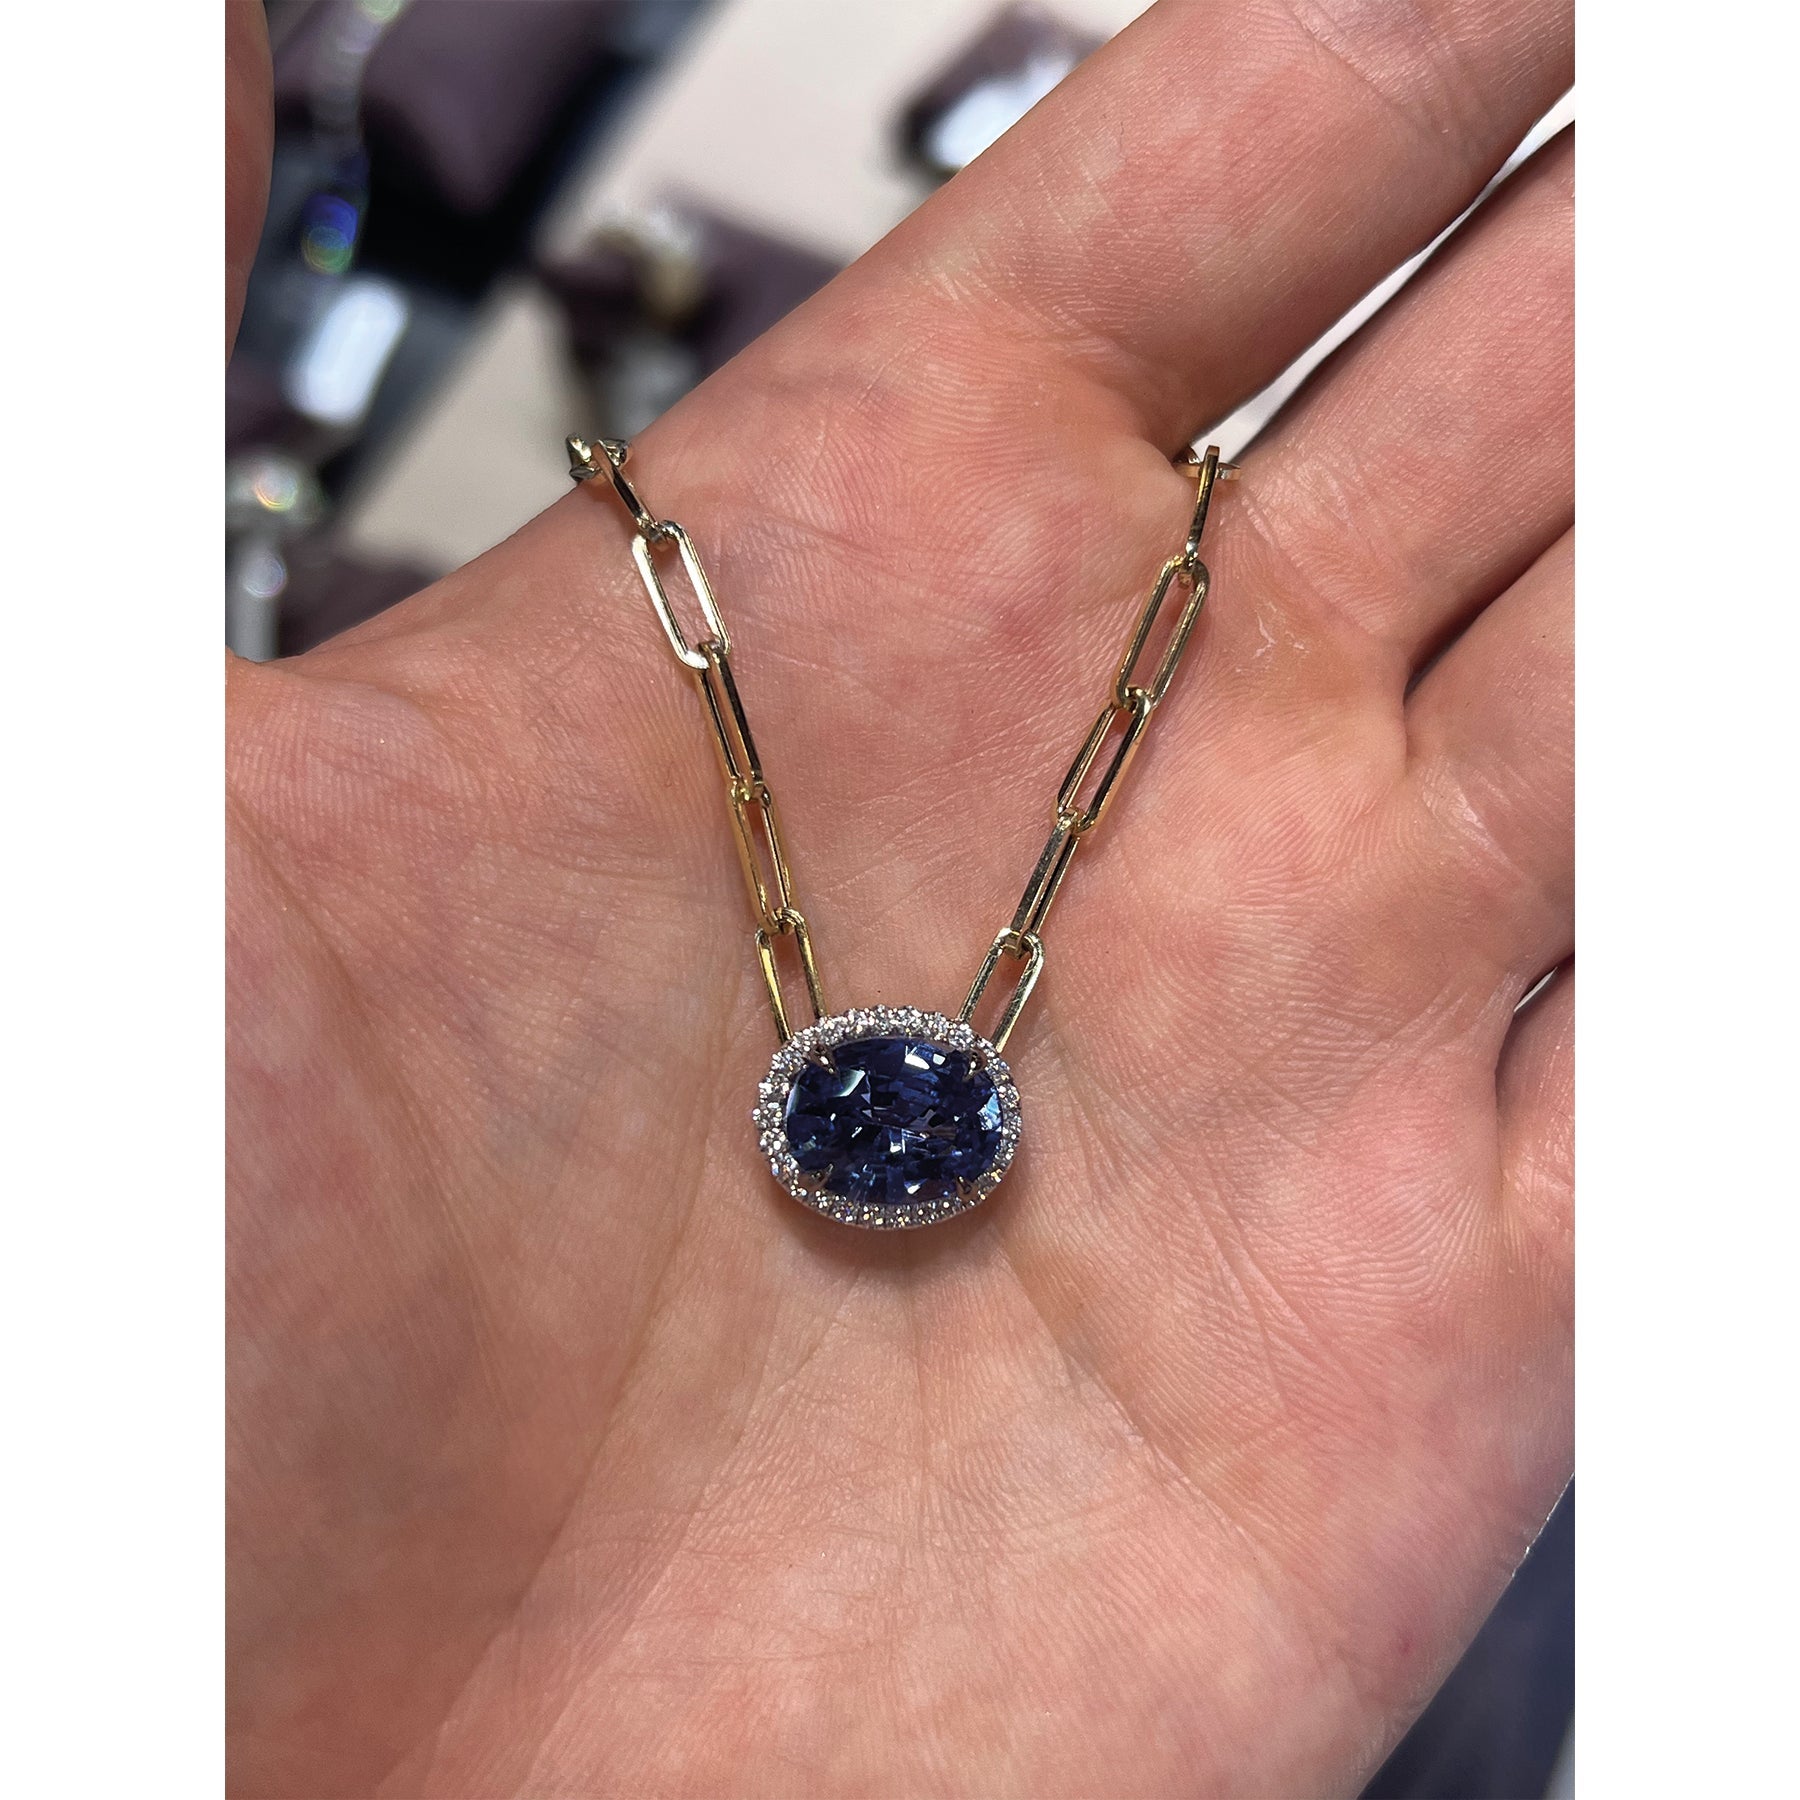 18K 5.63 Ct CDC Certified Oval Blue Sapphire Pendant